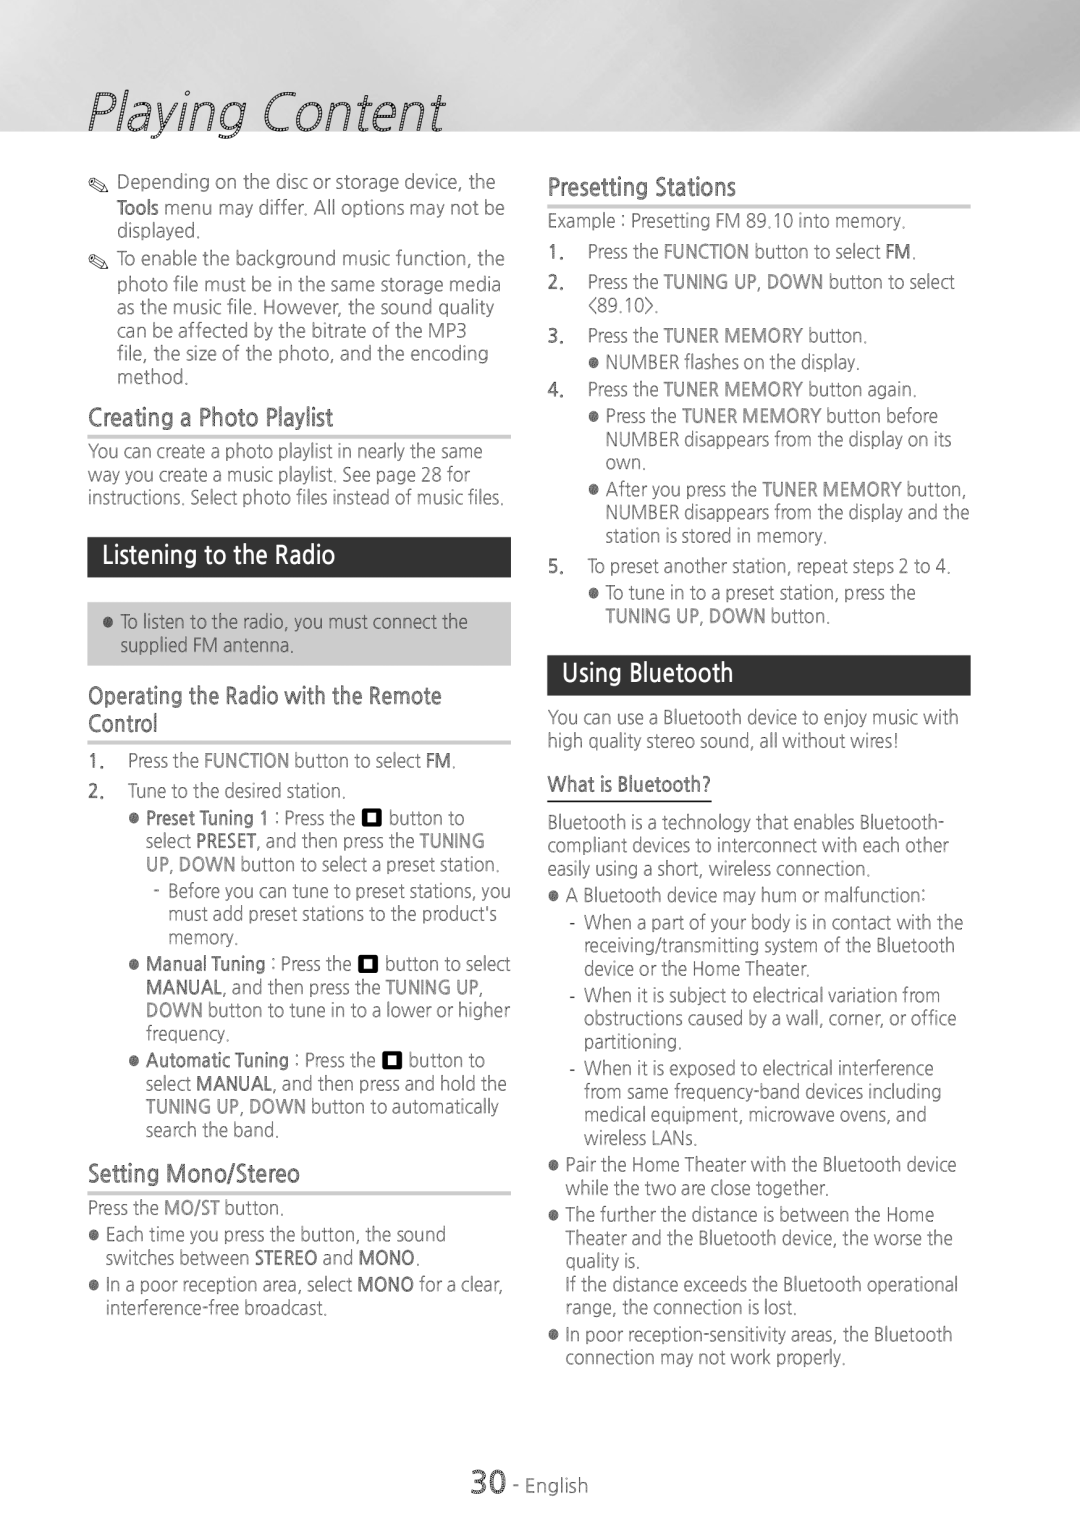 Samsung HTH5500 user manual Creating a Photo Playlist, Listening to the Radio, Setting Mono/Stereo, Presetting Stations 